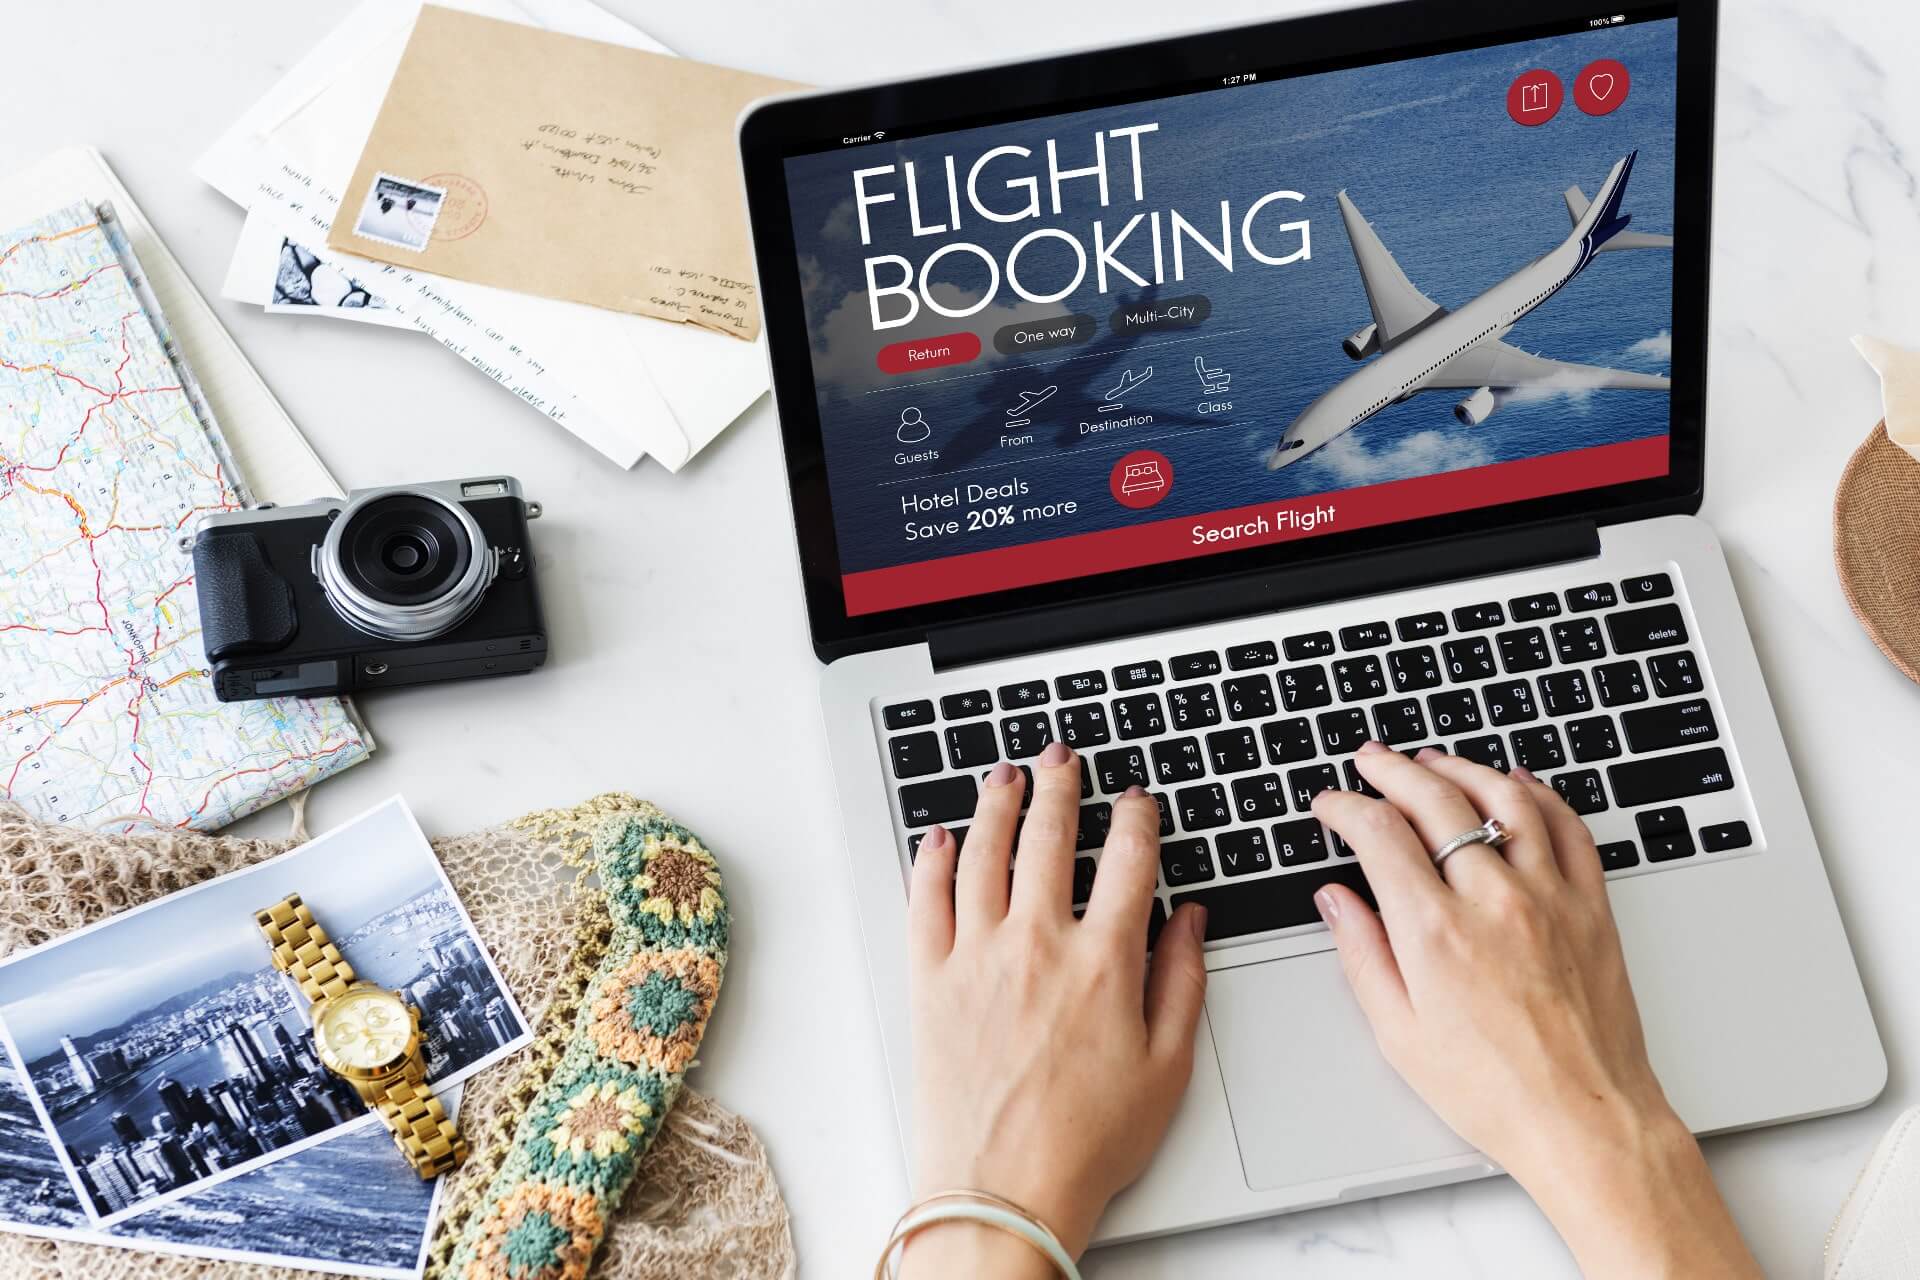 Find cheaper flights with a VPN